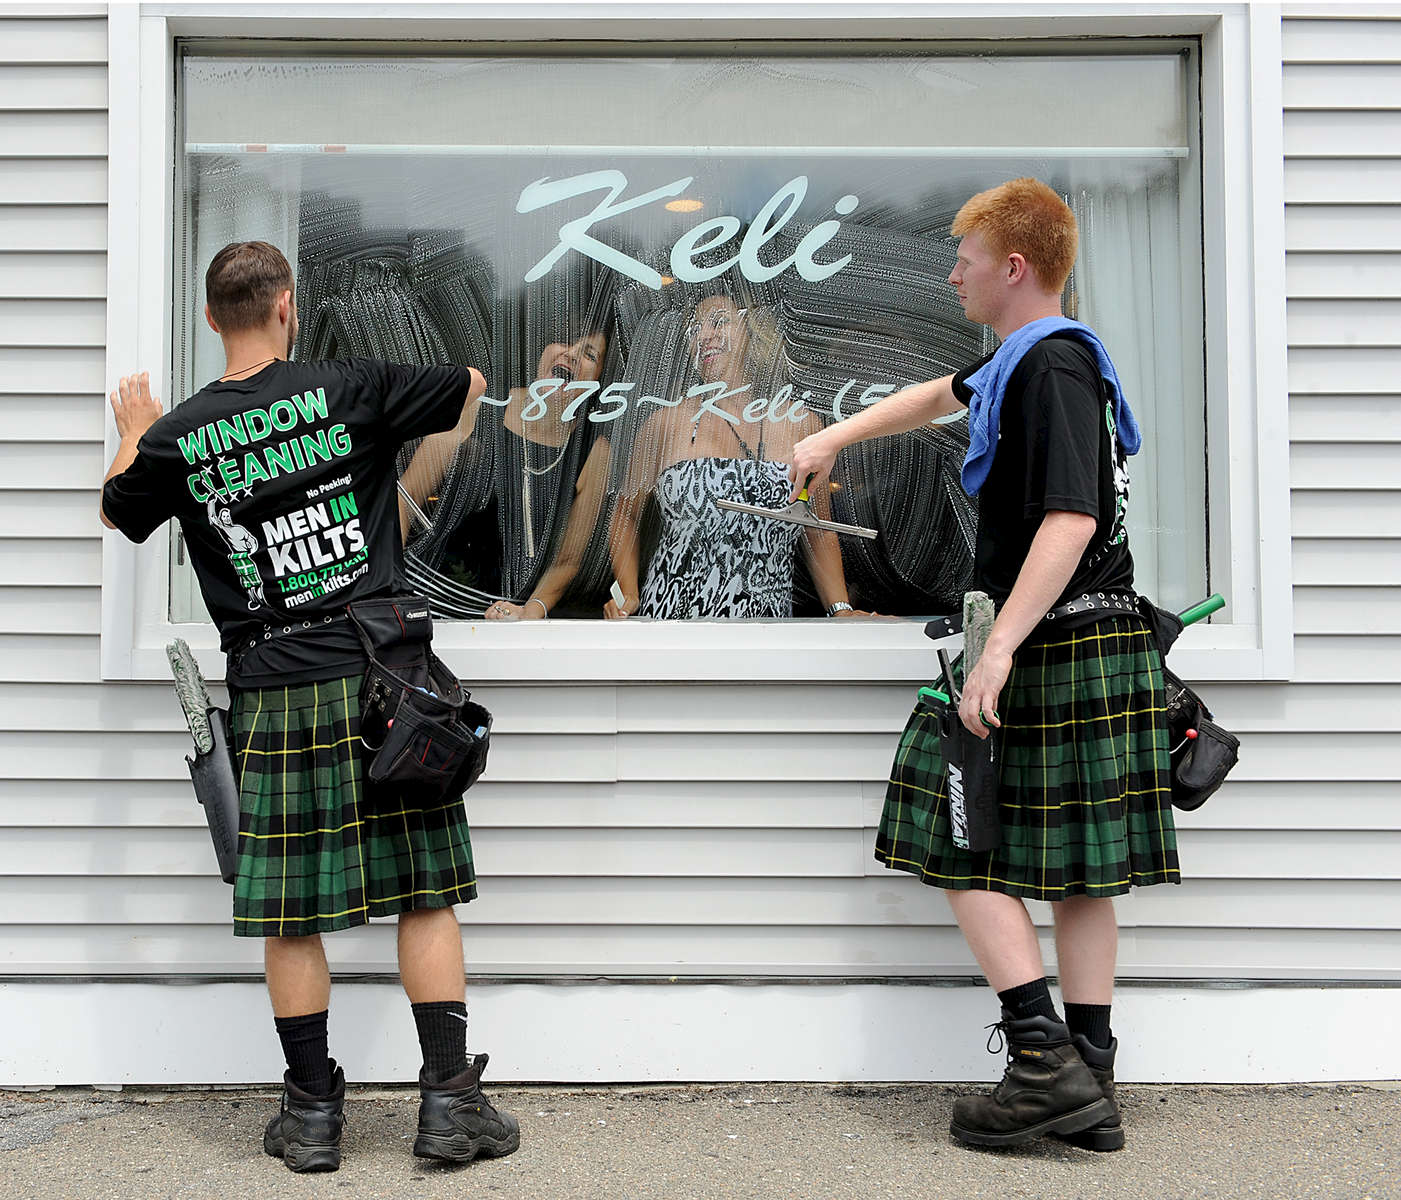 7/7/16-- FRAMINGHAM-- {quote}dressed to kilt{quote}Men in Kilts Window Cleaners Evan Kutz, 20, of Hopkinton, left, and Kyle Booth, 19, of Ashland, seem to meet the approval of hair stylists Natalie Anthony, left, and Cindy Wyman, at Keli in Framingham Centre.Daily News and Wicked Local Staff Photo/Art Illman